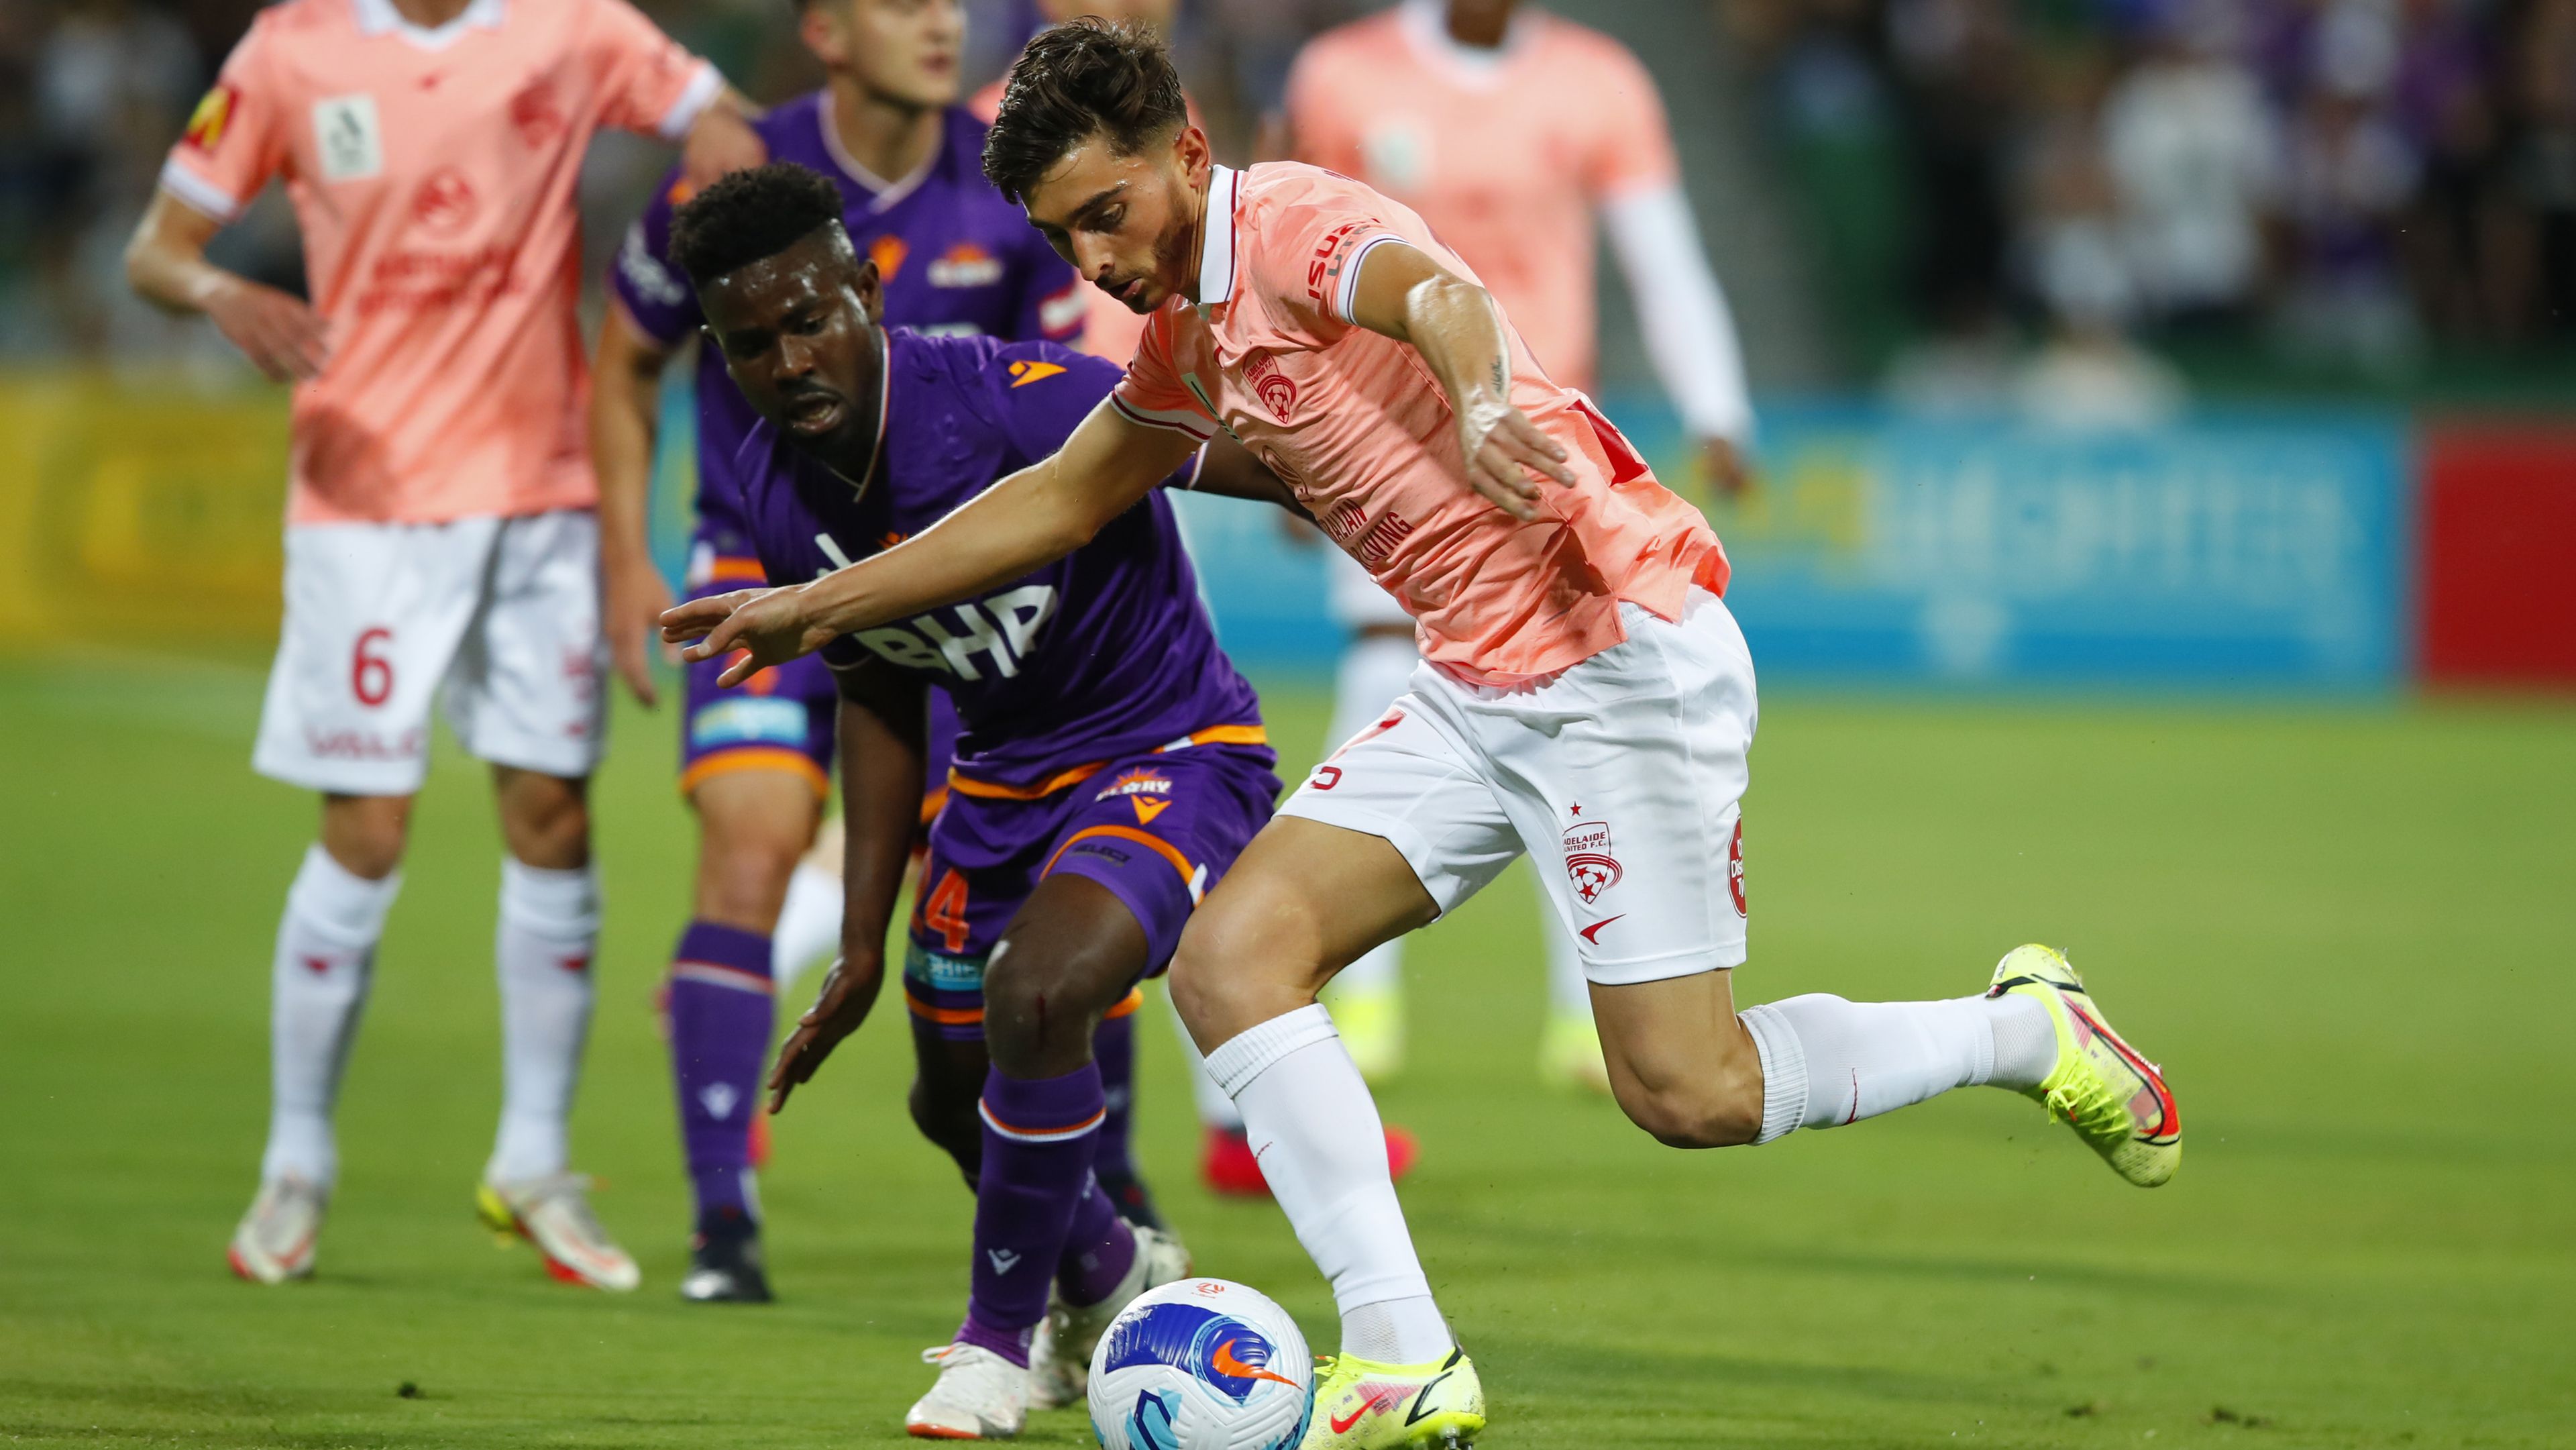 Josh Cavallo of Adelaide United fends off Pacifique Niyongabire of the Perth Glory during an A-League match.